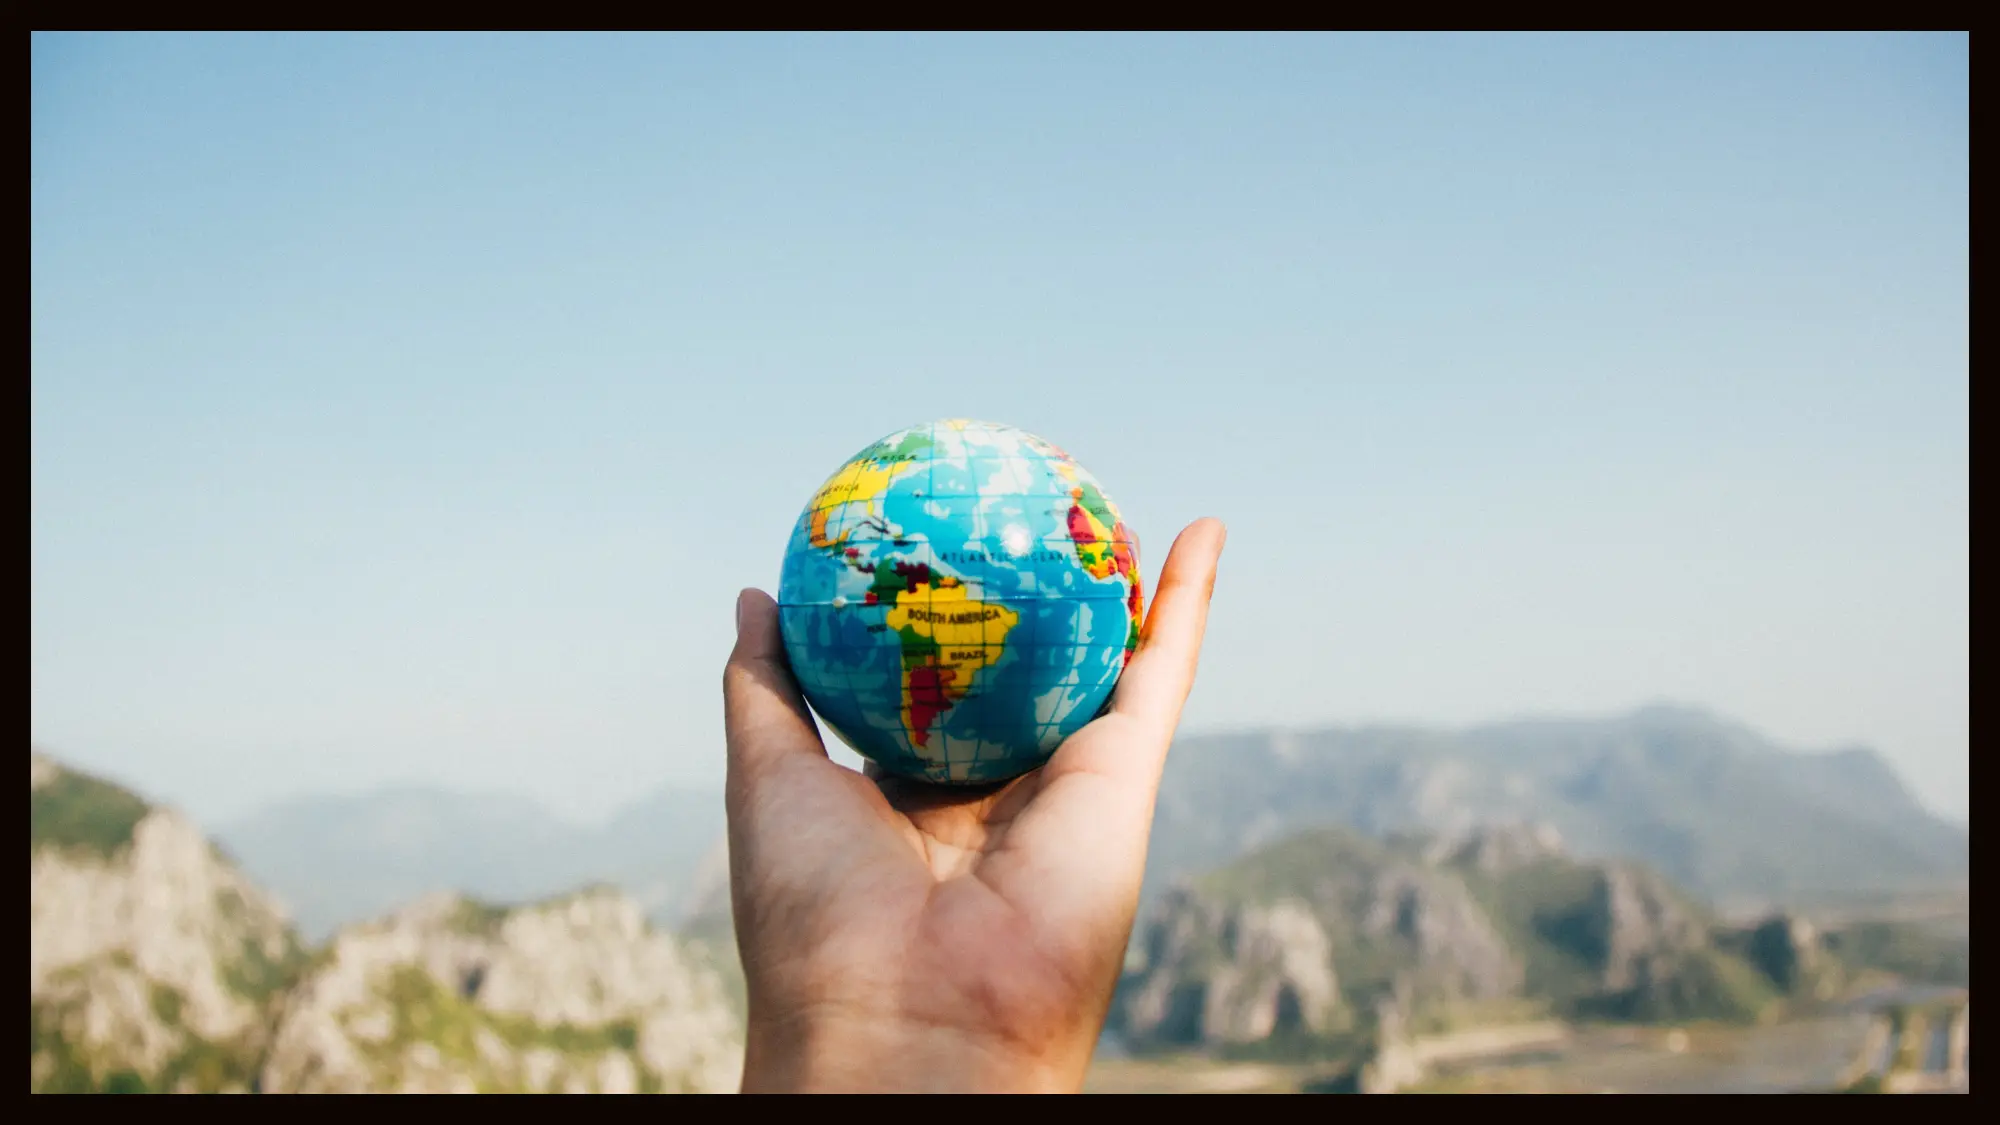 A hand holding a small globe with a blurry mountainous landscape in the background, symbolizing travel and the beauty of exploring the world.